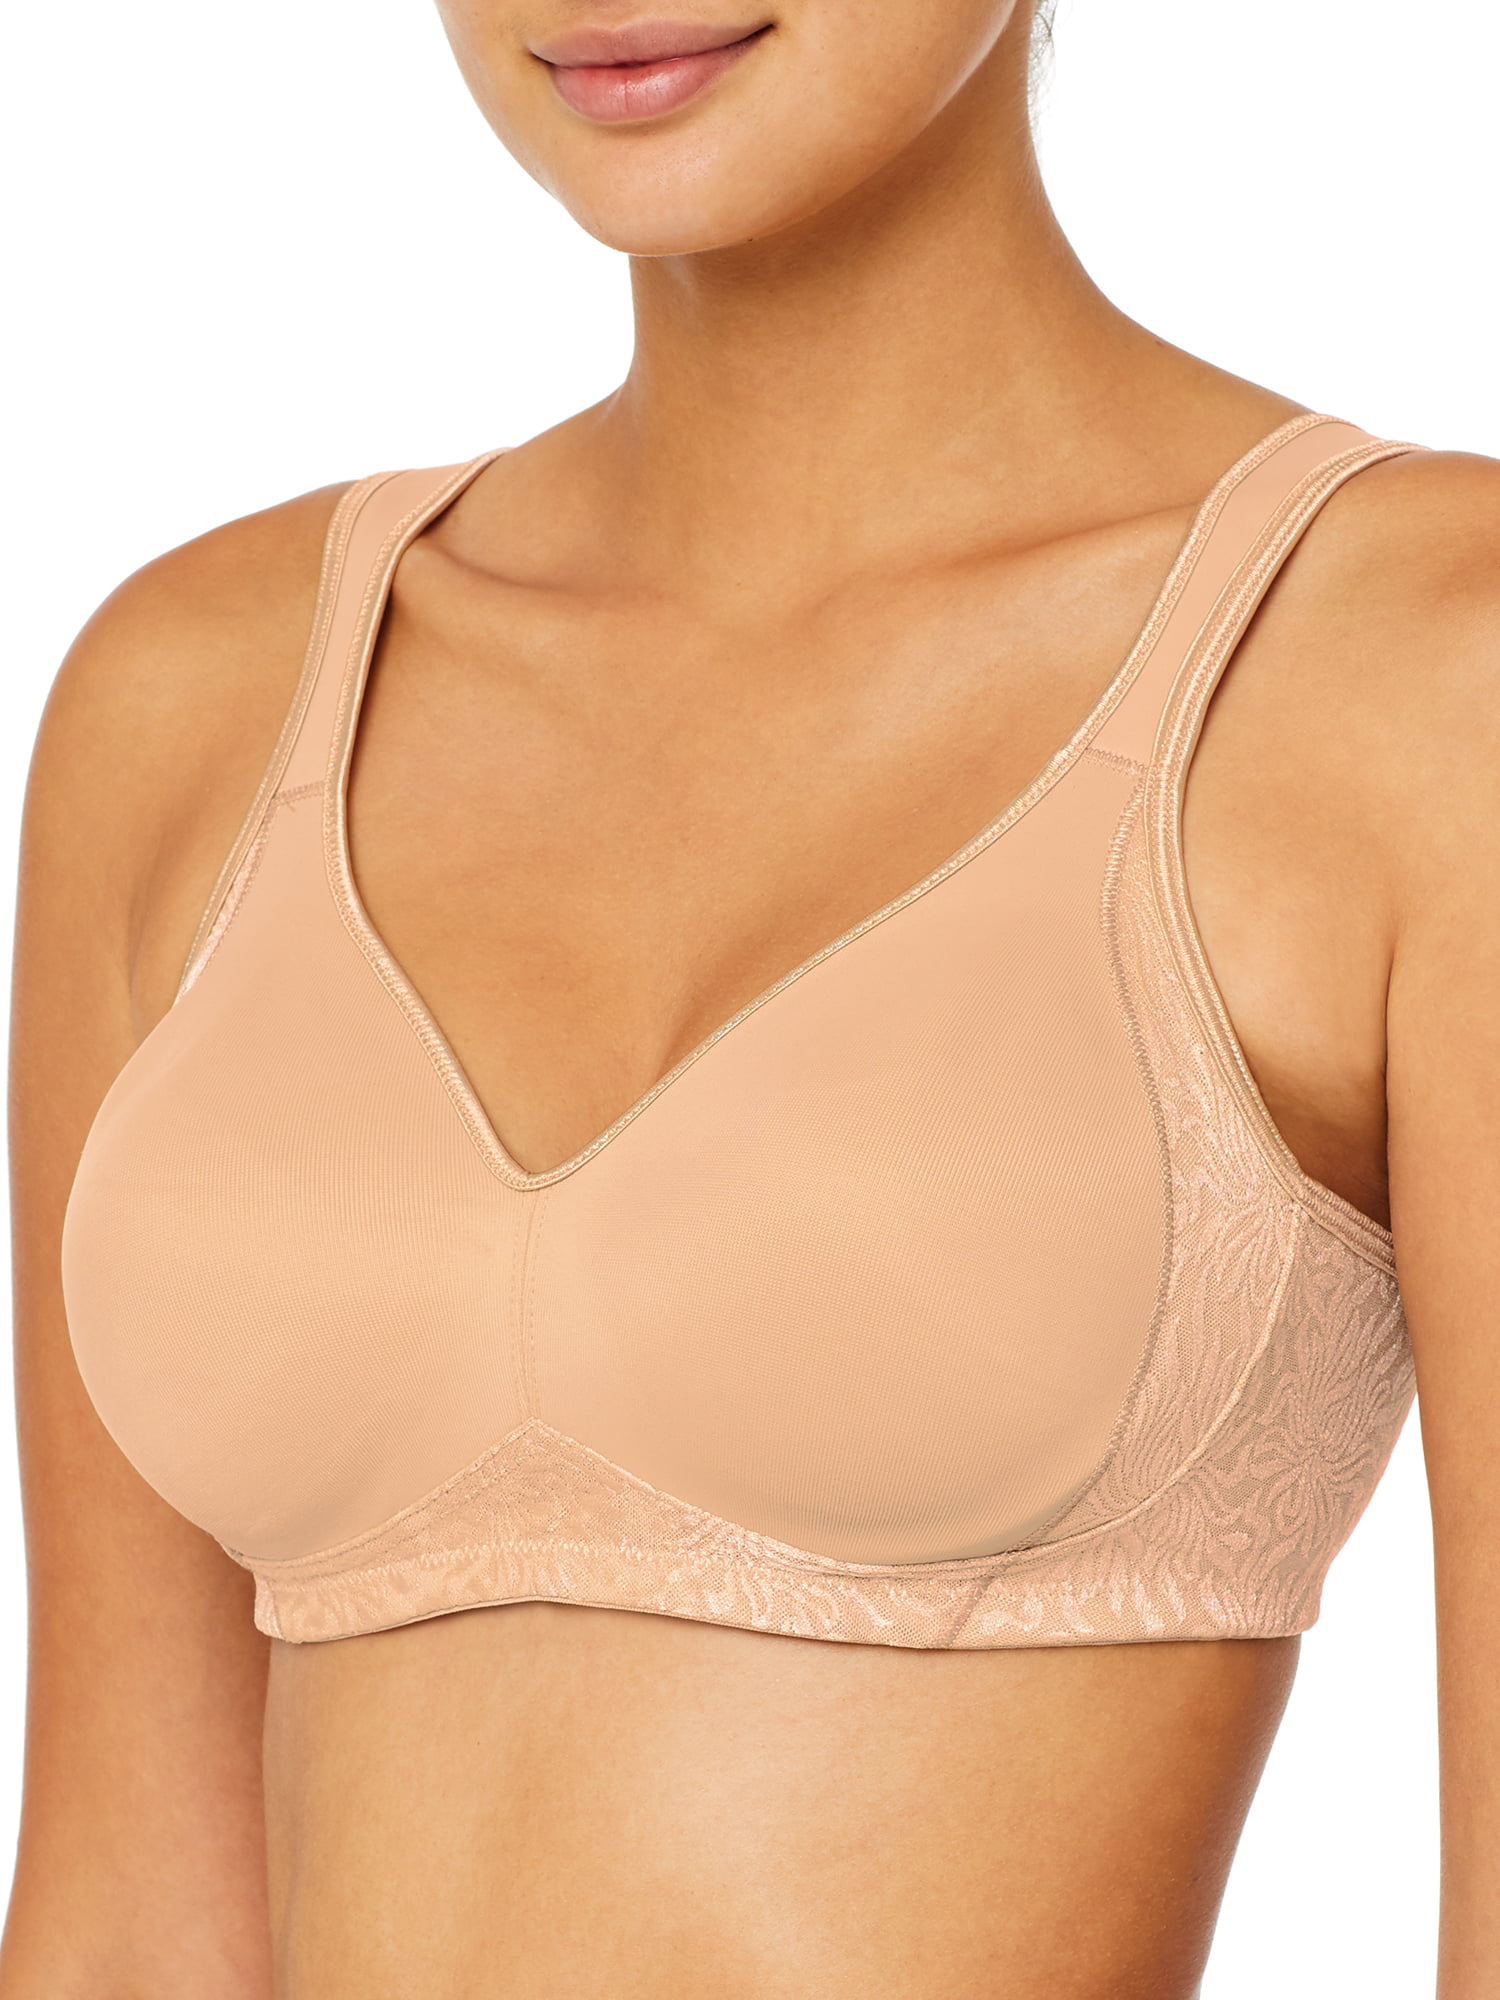 Playtex Women's 18 Hour Side and Back Smoothing Wireless Bra 4395